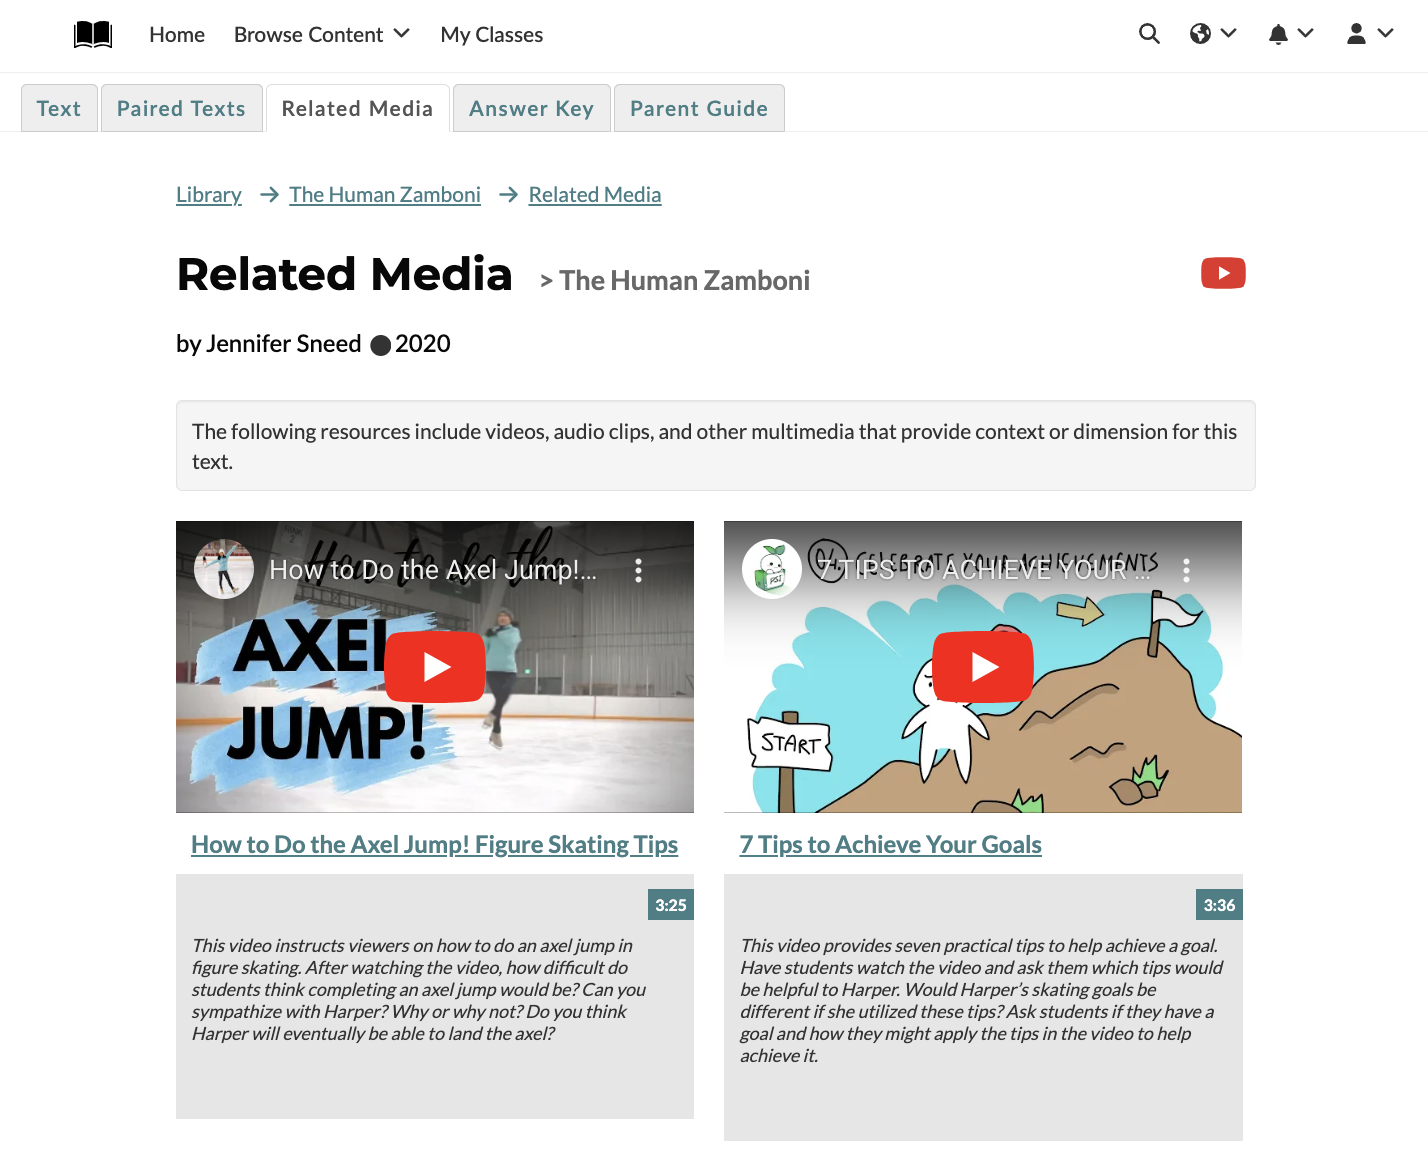  Screenshot of the Relate Media tab for the reading “The Human Zamboni.”